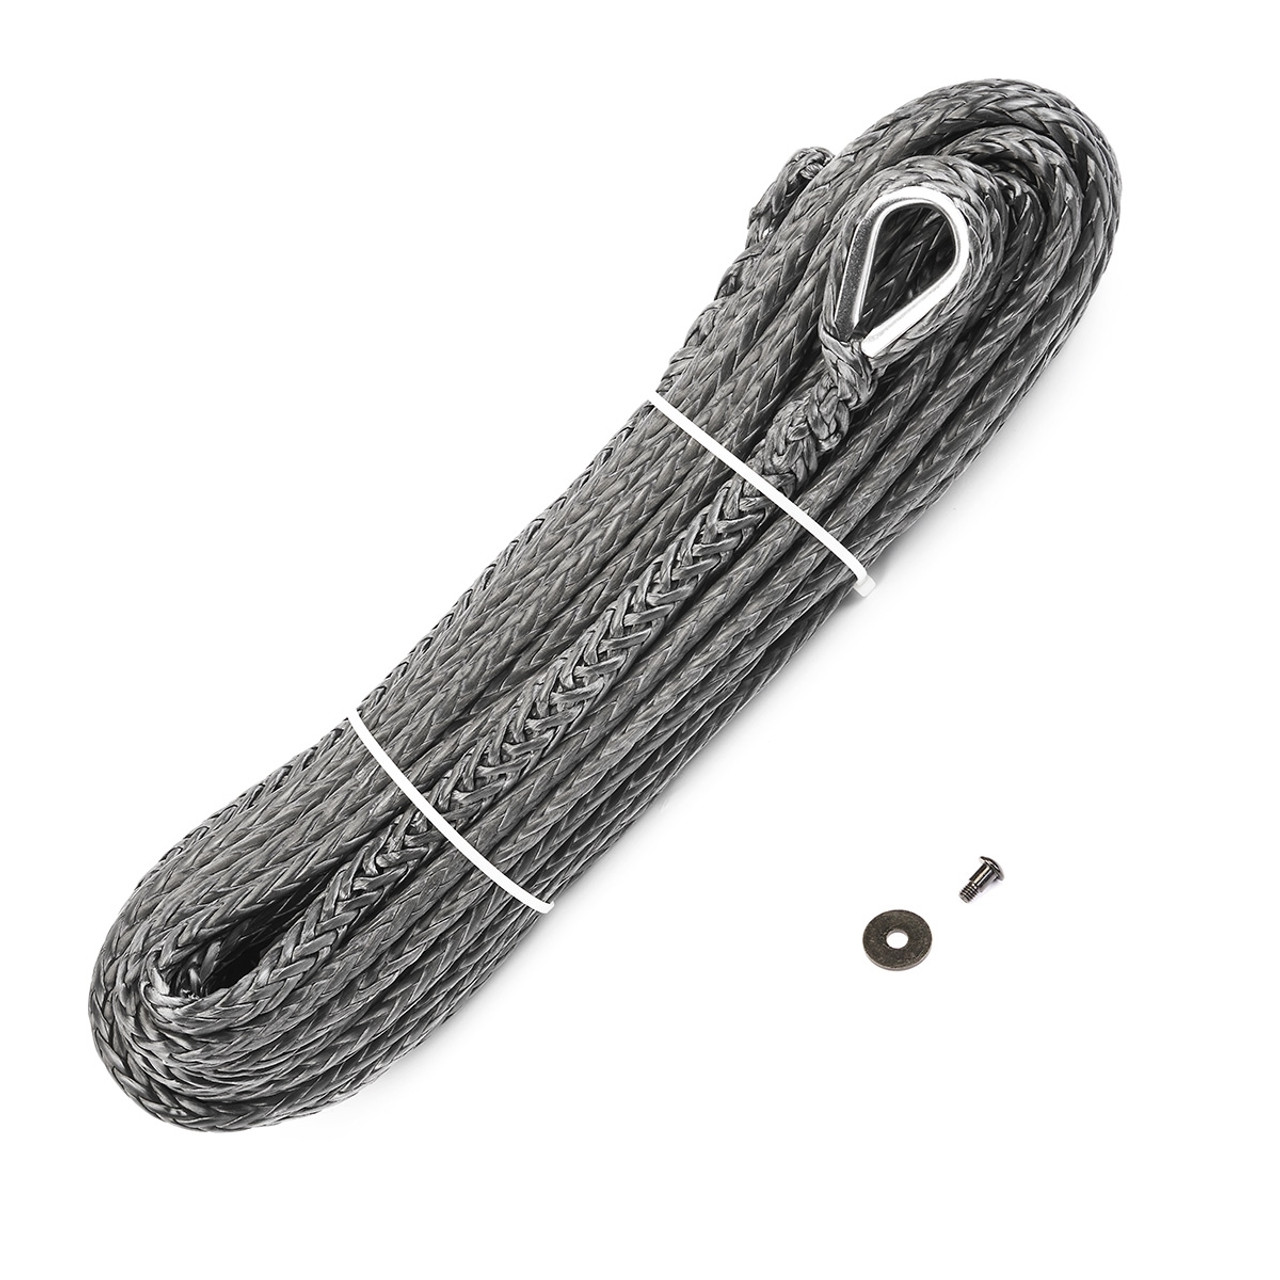 WARN 90' X 3/8 Replacement Synthetic Rope